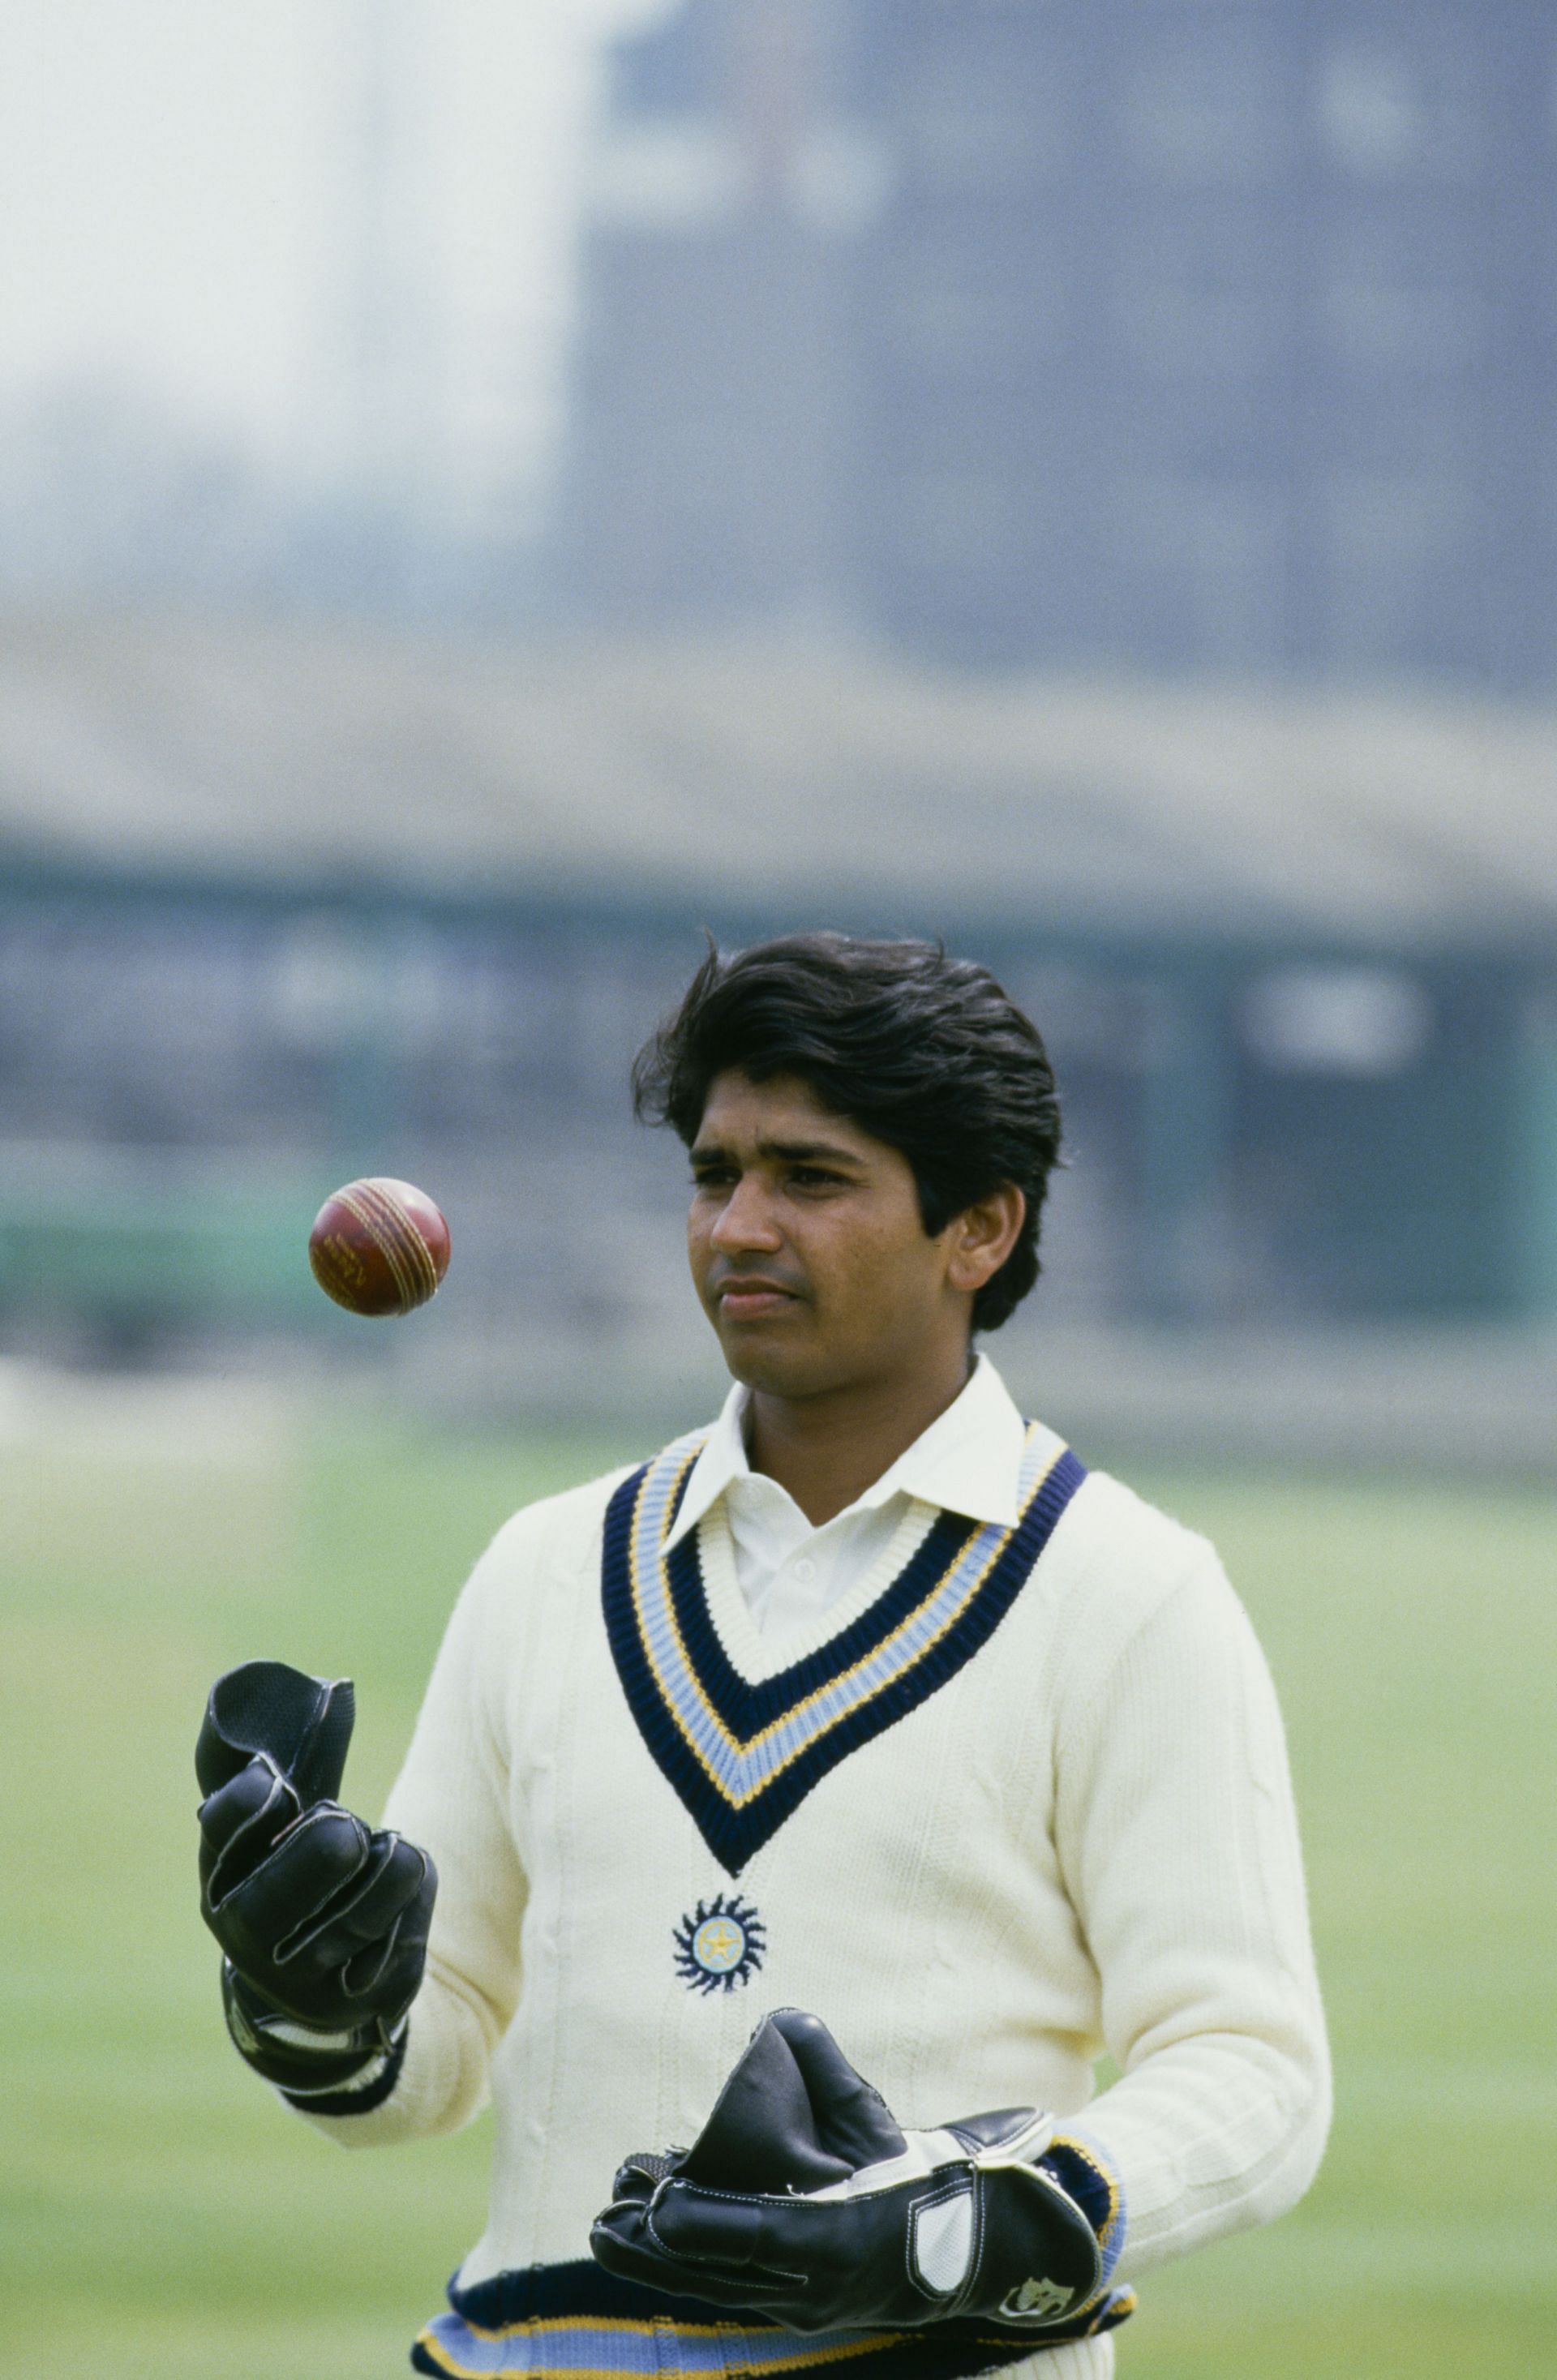 Chandrakant Pandit was a wicket-keeper batter for the Indian team (Image: Getty)